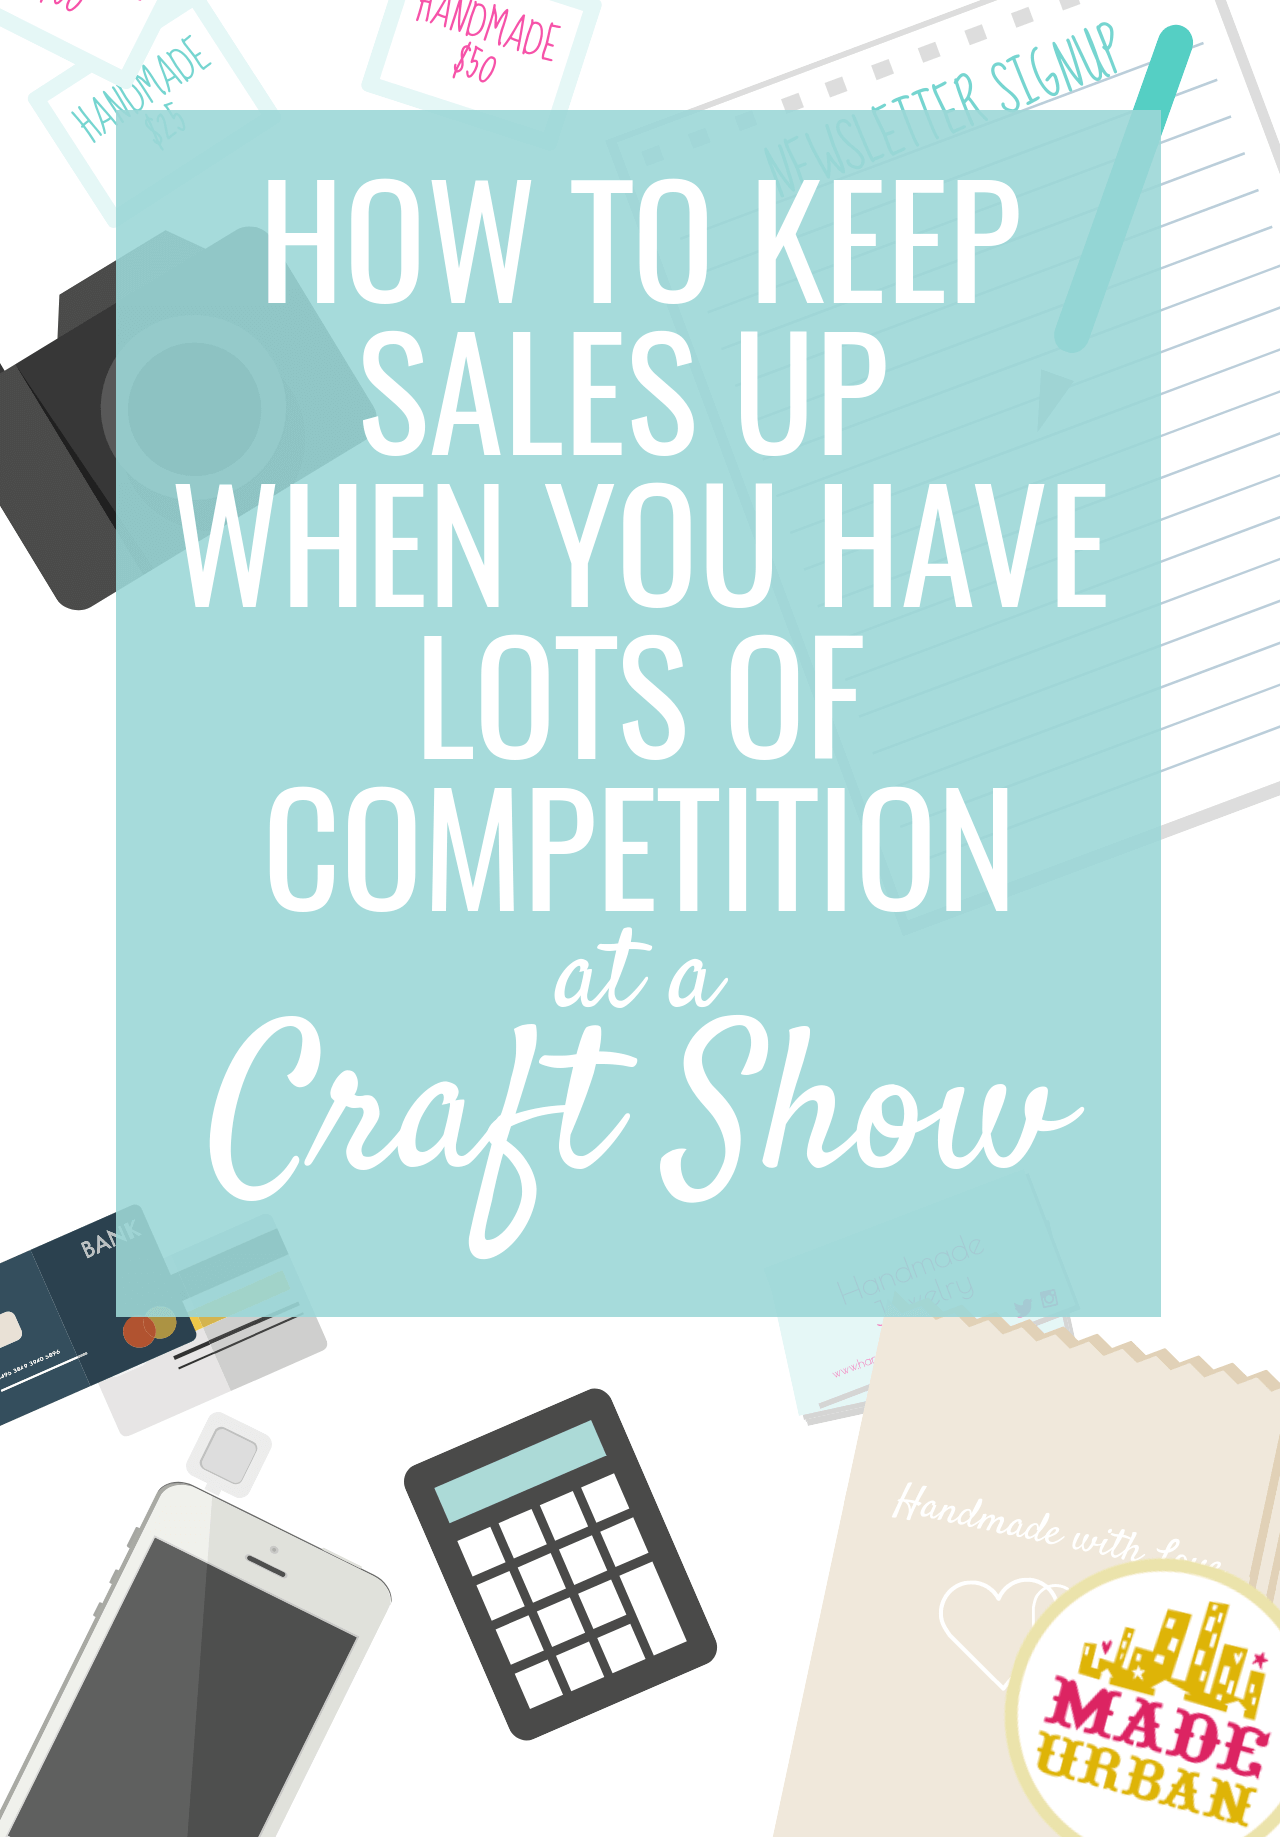 Craft shows can be competitive depending on the product you sell. If someone selling a similar item is close by, here's how to ensure your sales don't drop.